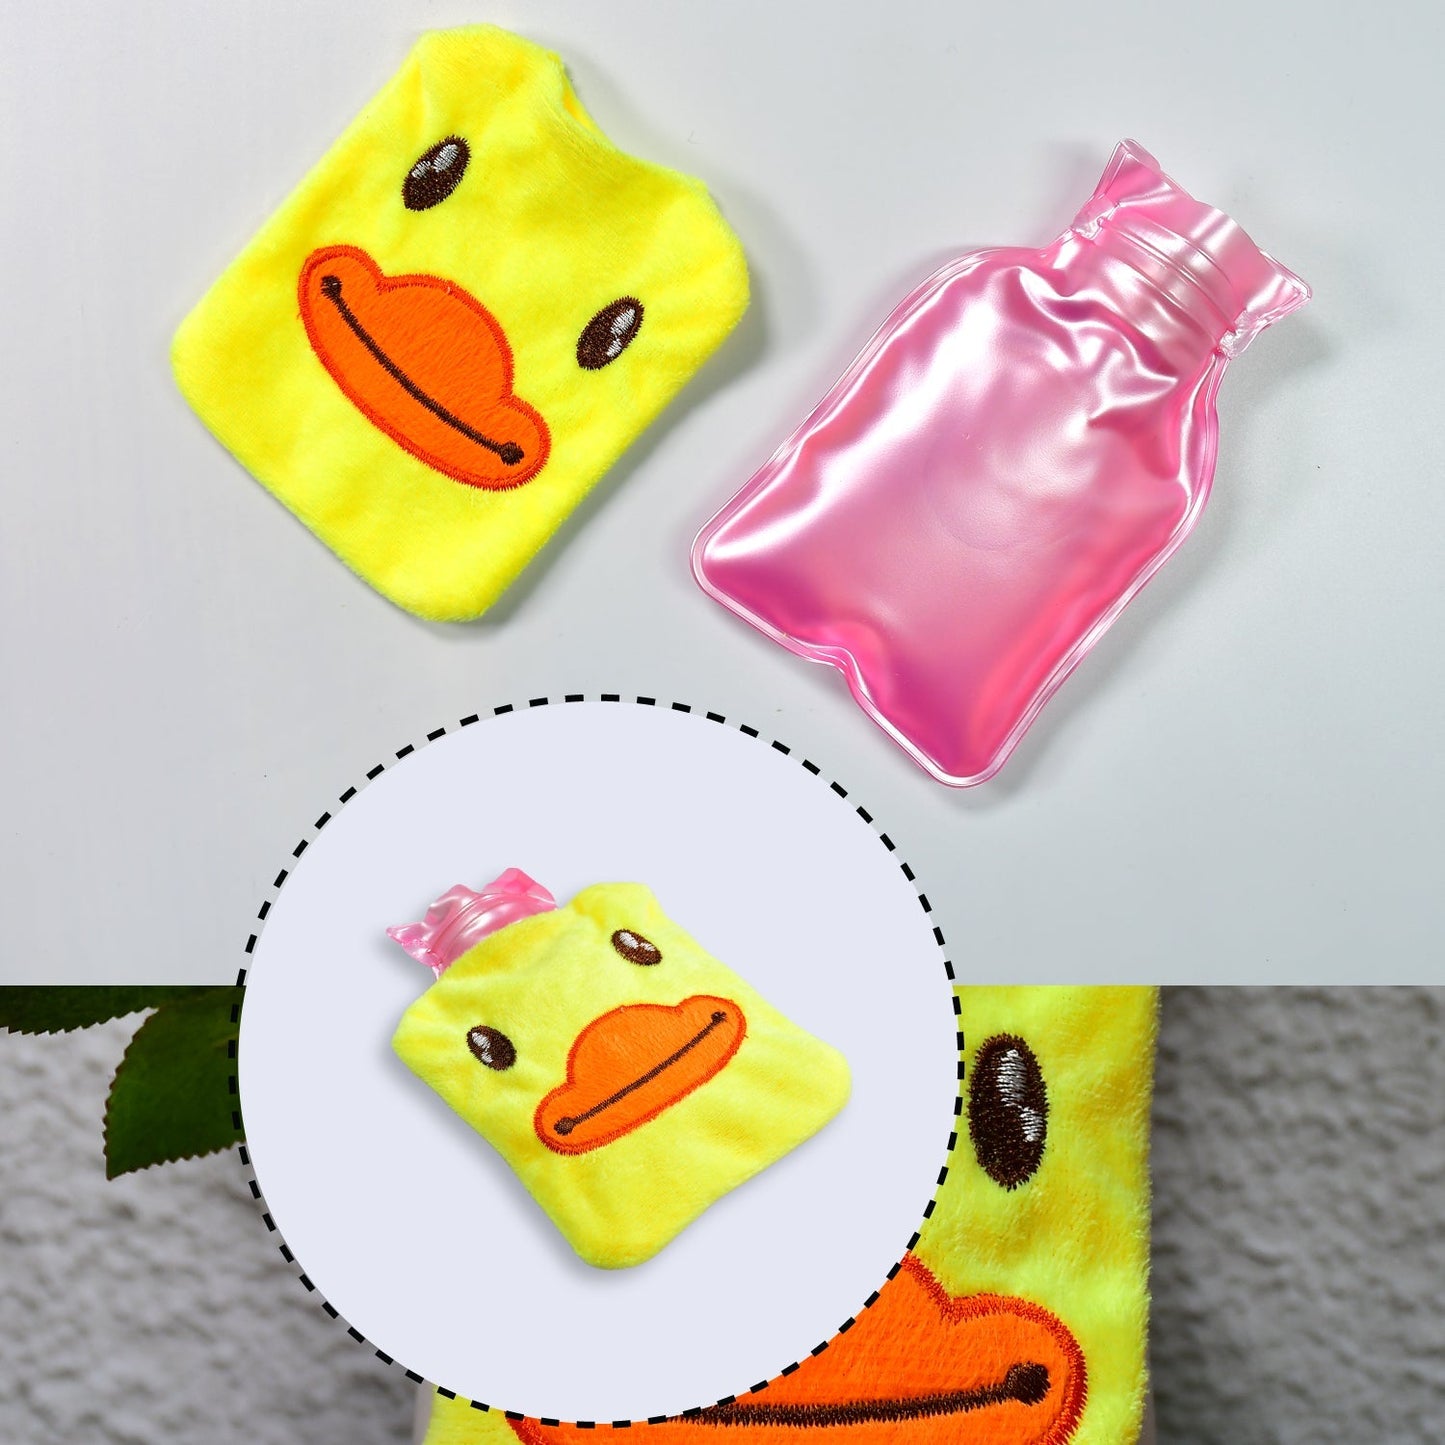 Yellow Duck small Hot Water Bag with Cover for Pain Relief, Neck, Shoulder Pain and Hand, Feet Warmer, Menstrual Cramps